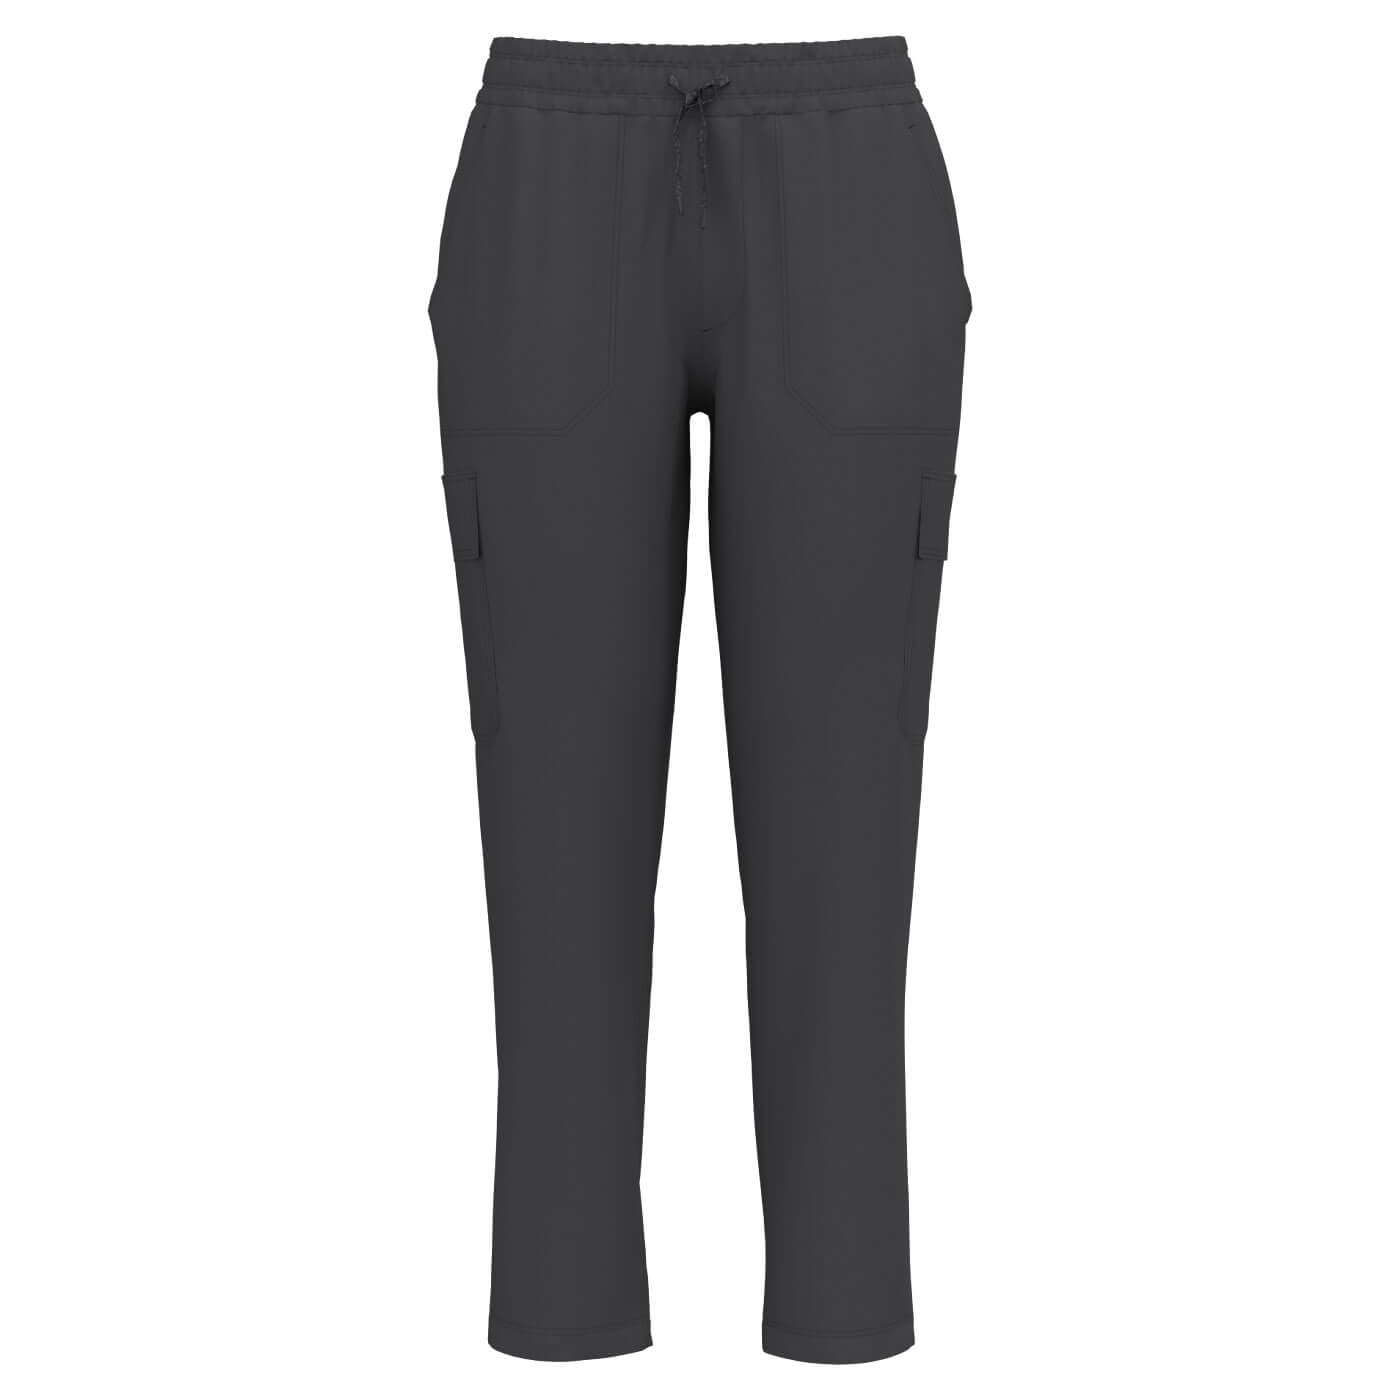 THE NORTH FACE Pants for women, Buy online